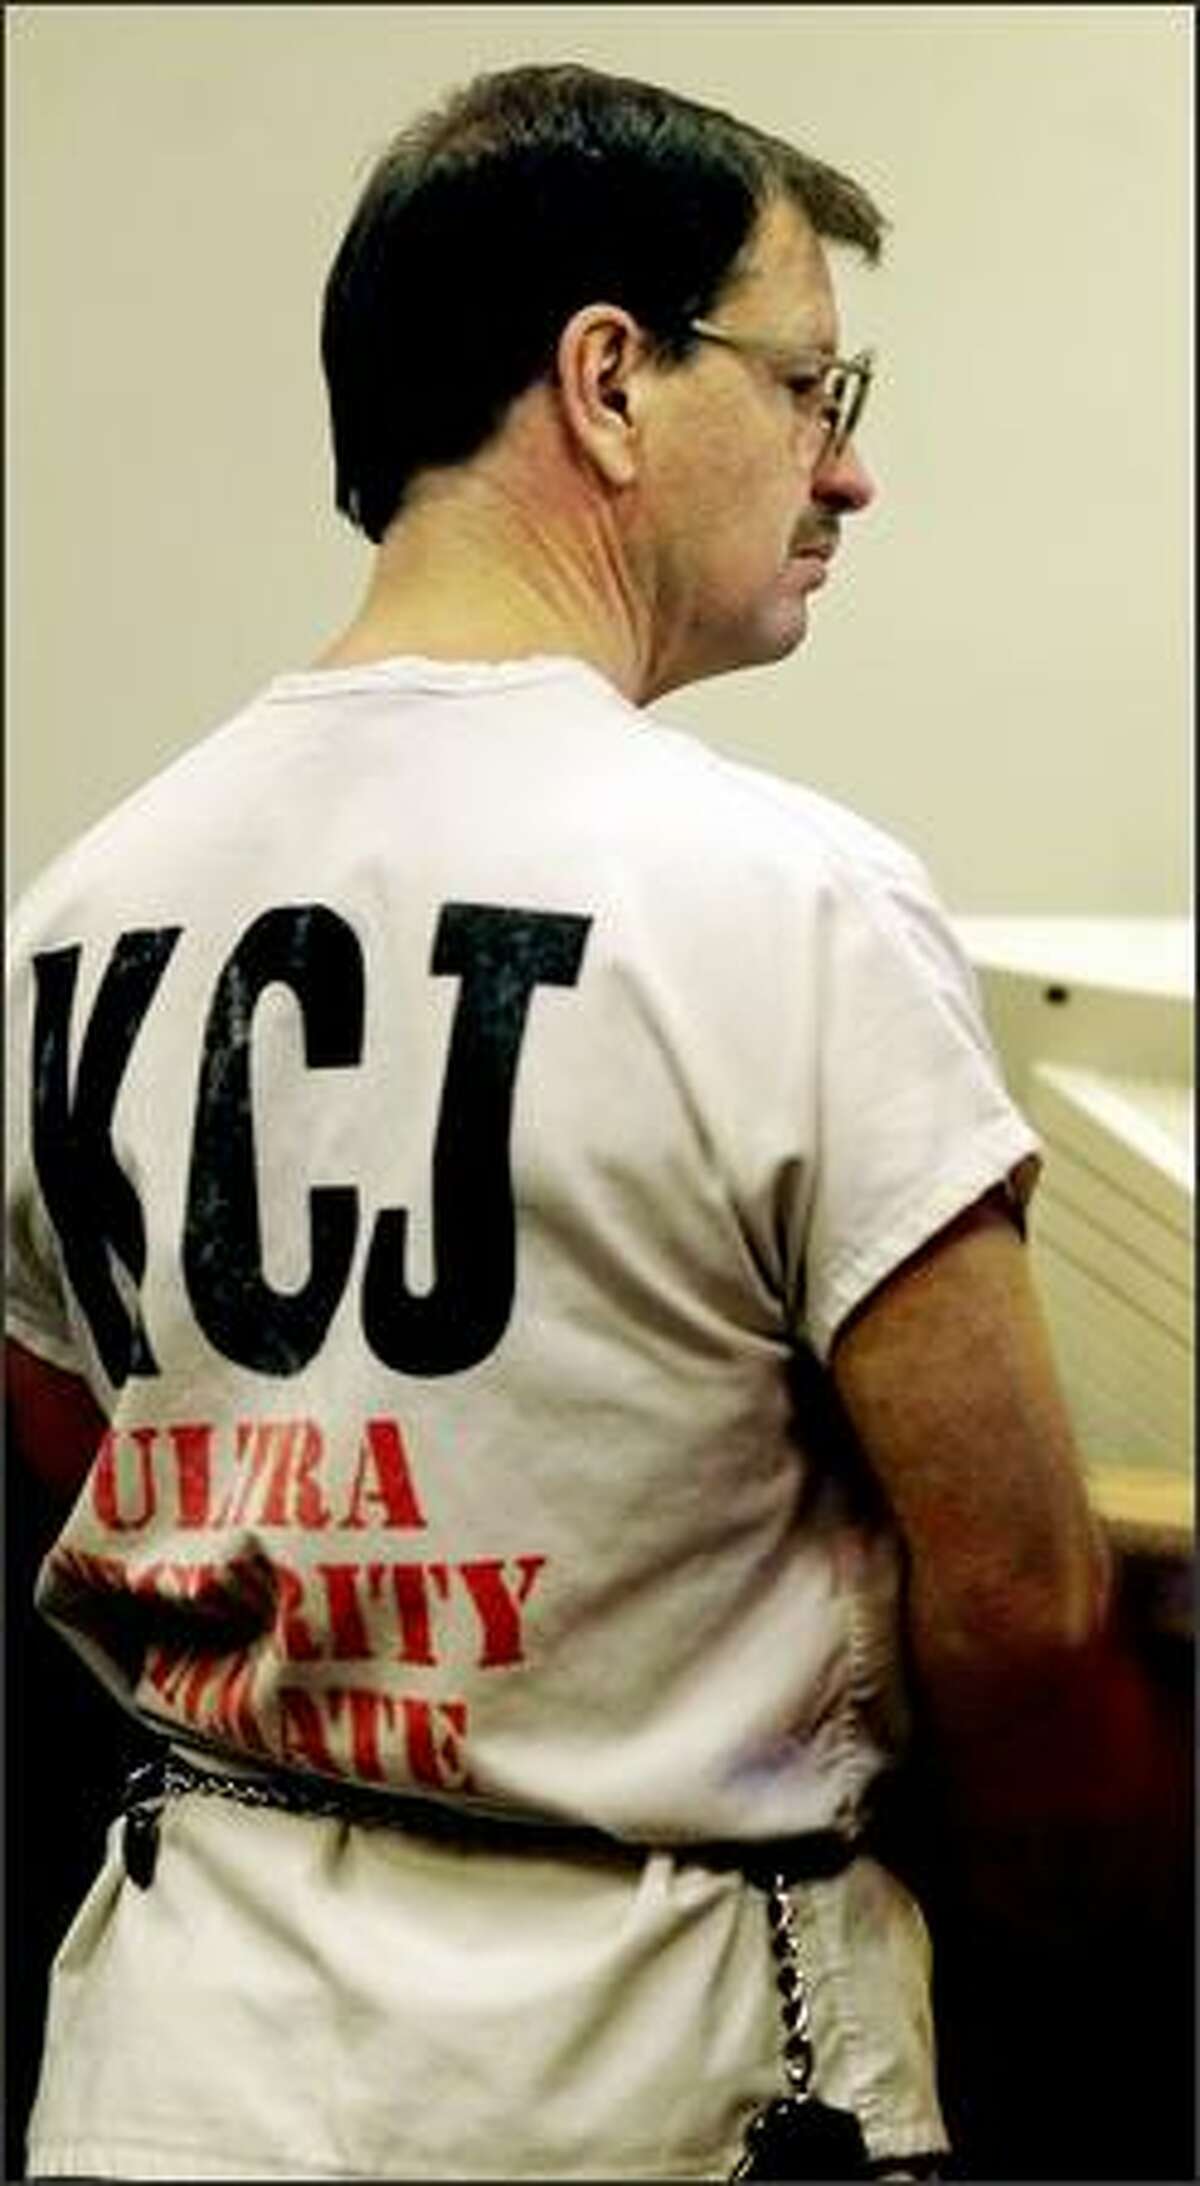 Gary Ridgway, then a suspect and later convicted in the Green River serial murder case, was in the courtroom of Judge Jeffrey Ramsdell on Jan. 3, 2002. In November of 2003 he pleaded guilty to 48 counts of aggravated murder and received a sentence of life in prison without parole. (P-I photo by Dan DeLong)